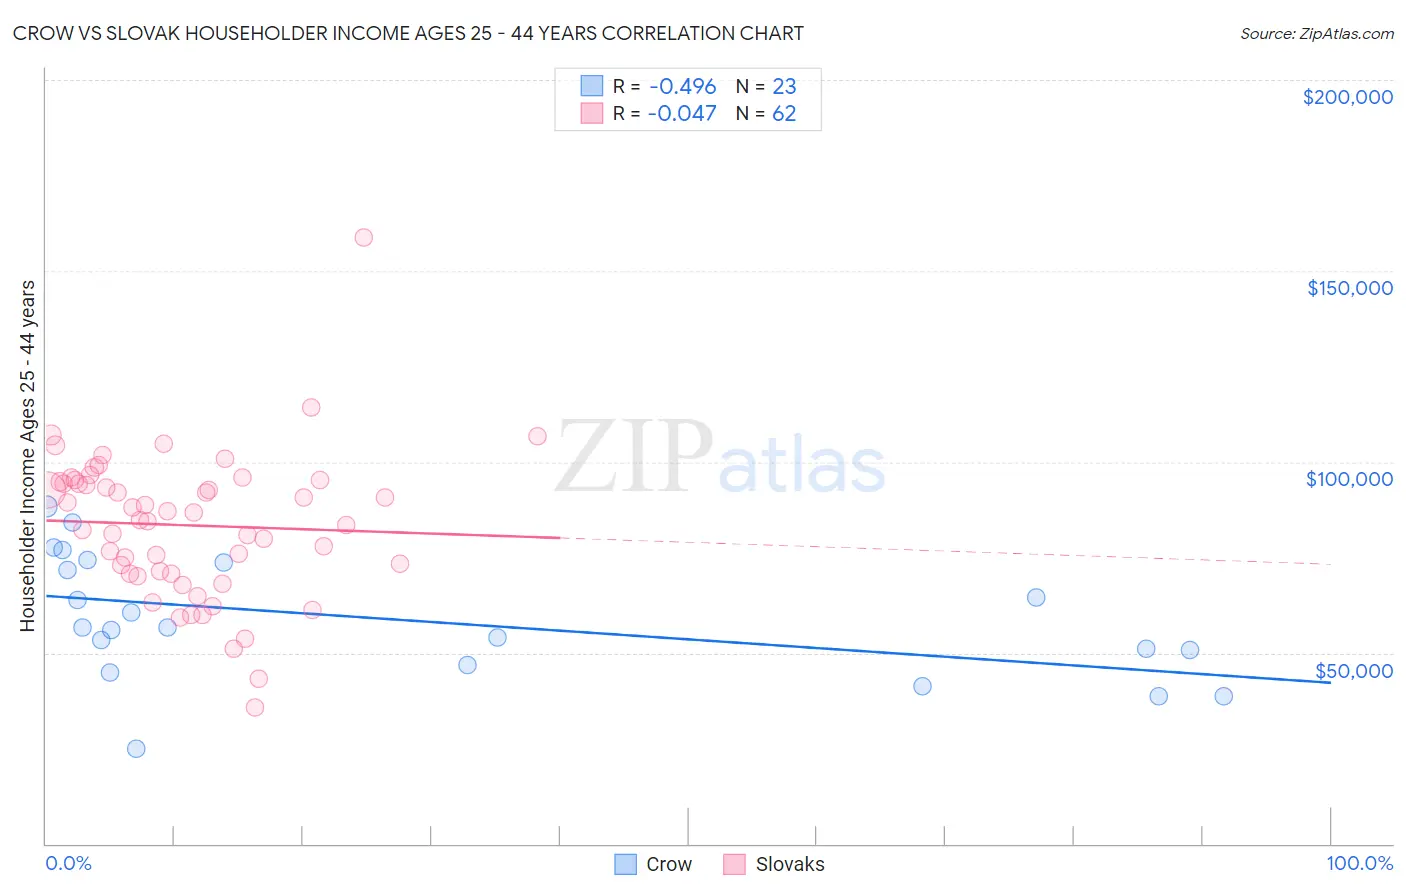 Crow vs Slovak Householder Income Ages 25 - 44 years